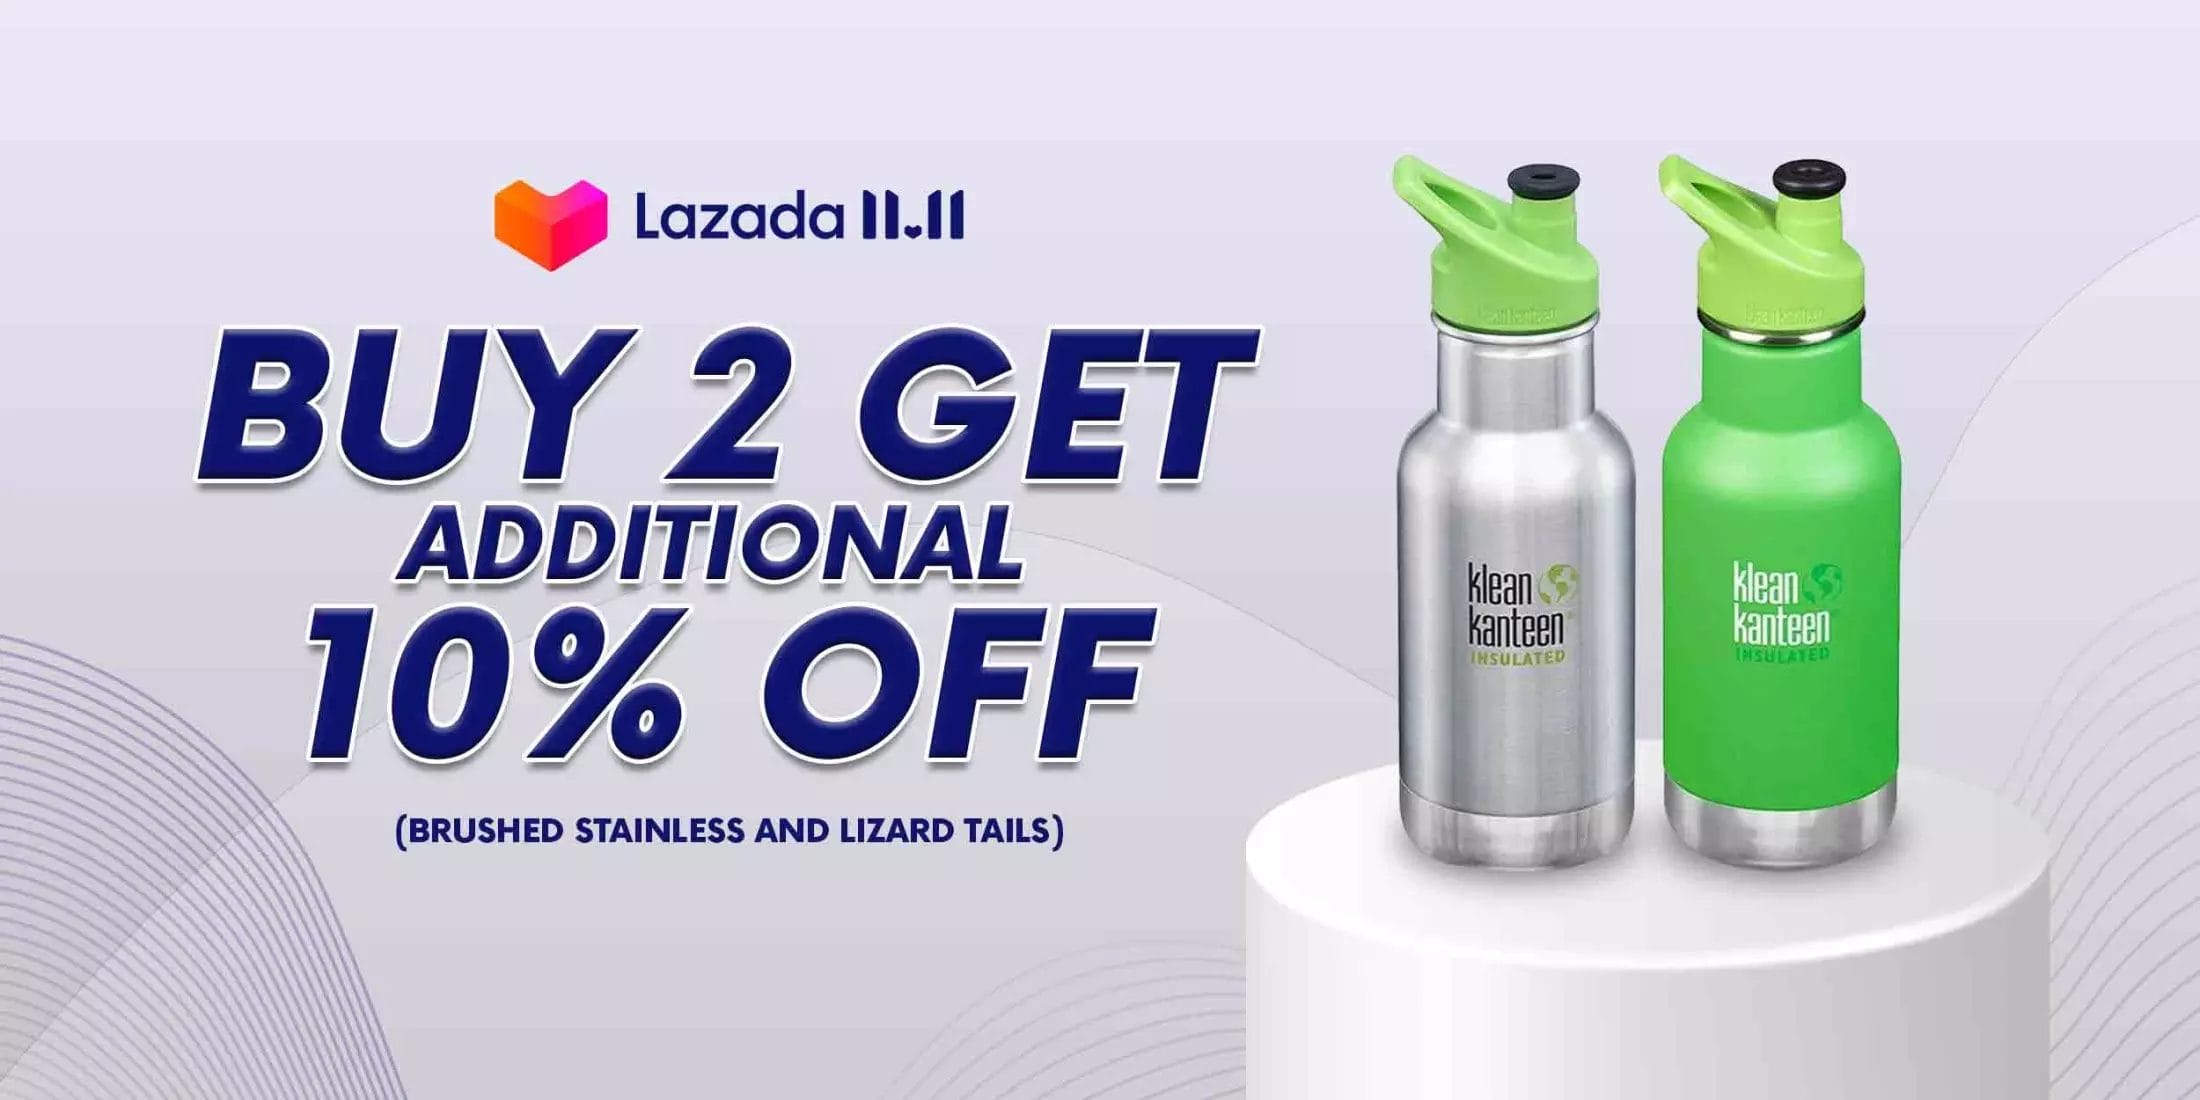 Klean Kanteen Lazada 11.11 Sale: Up To 30% Off On Insulated Tumblers